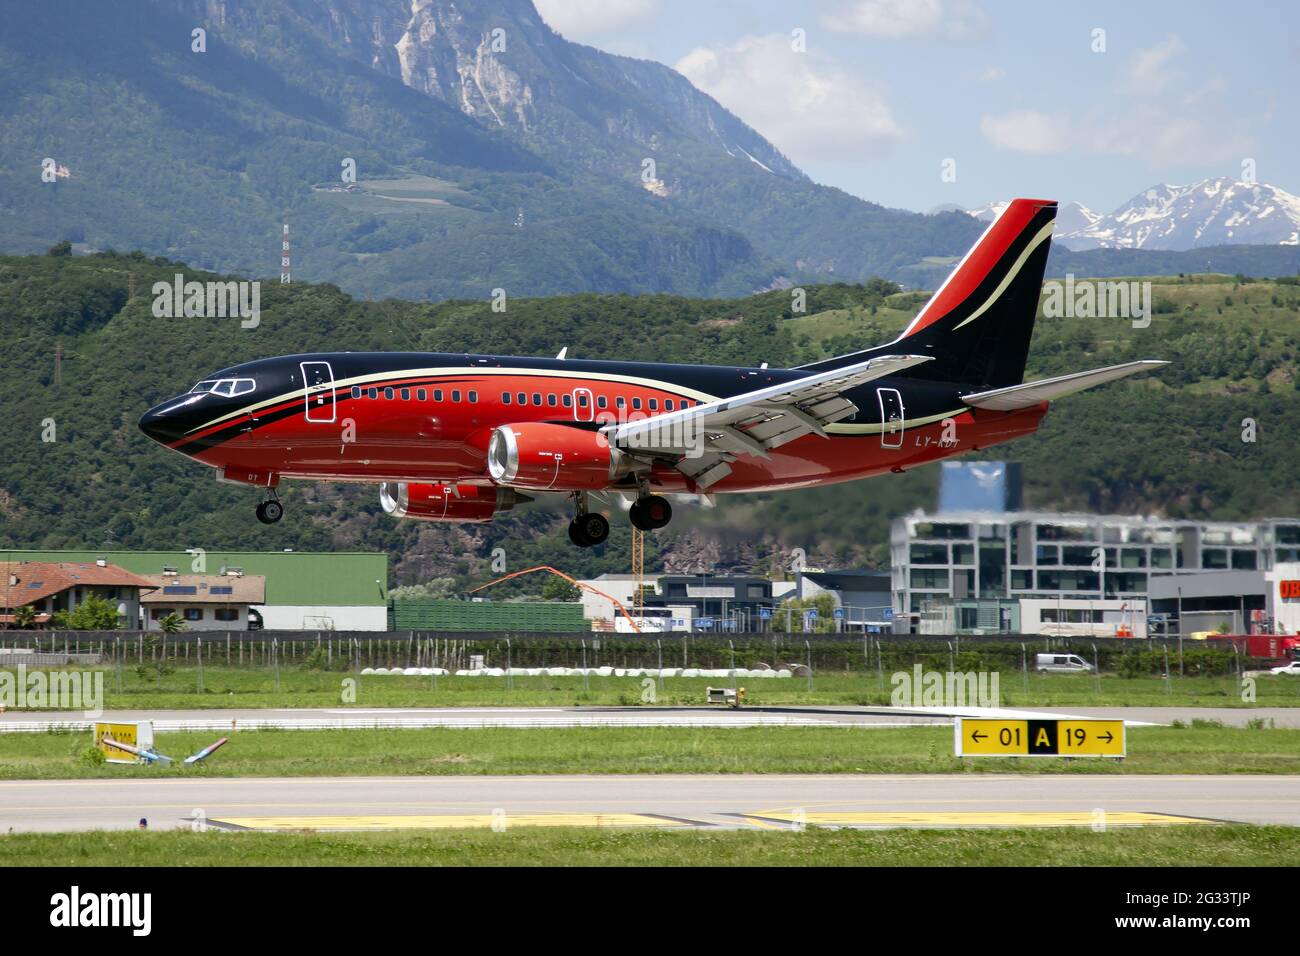 The lituanian Klasjet Boeing 737-500 landing at Bolzano airport carrying the Czech national football team. This is the very first landing of a Boeihg 737 in this regional airport. Stock Photo